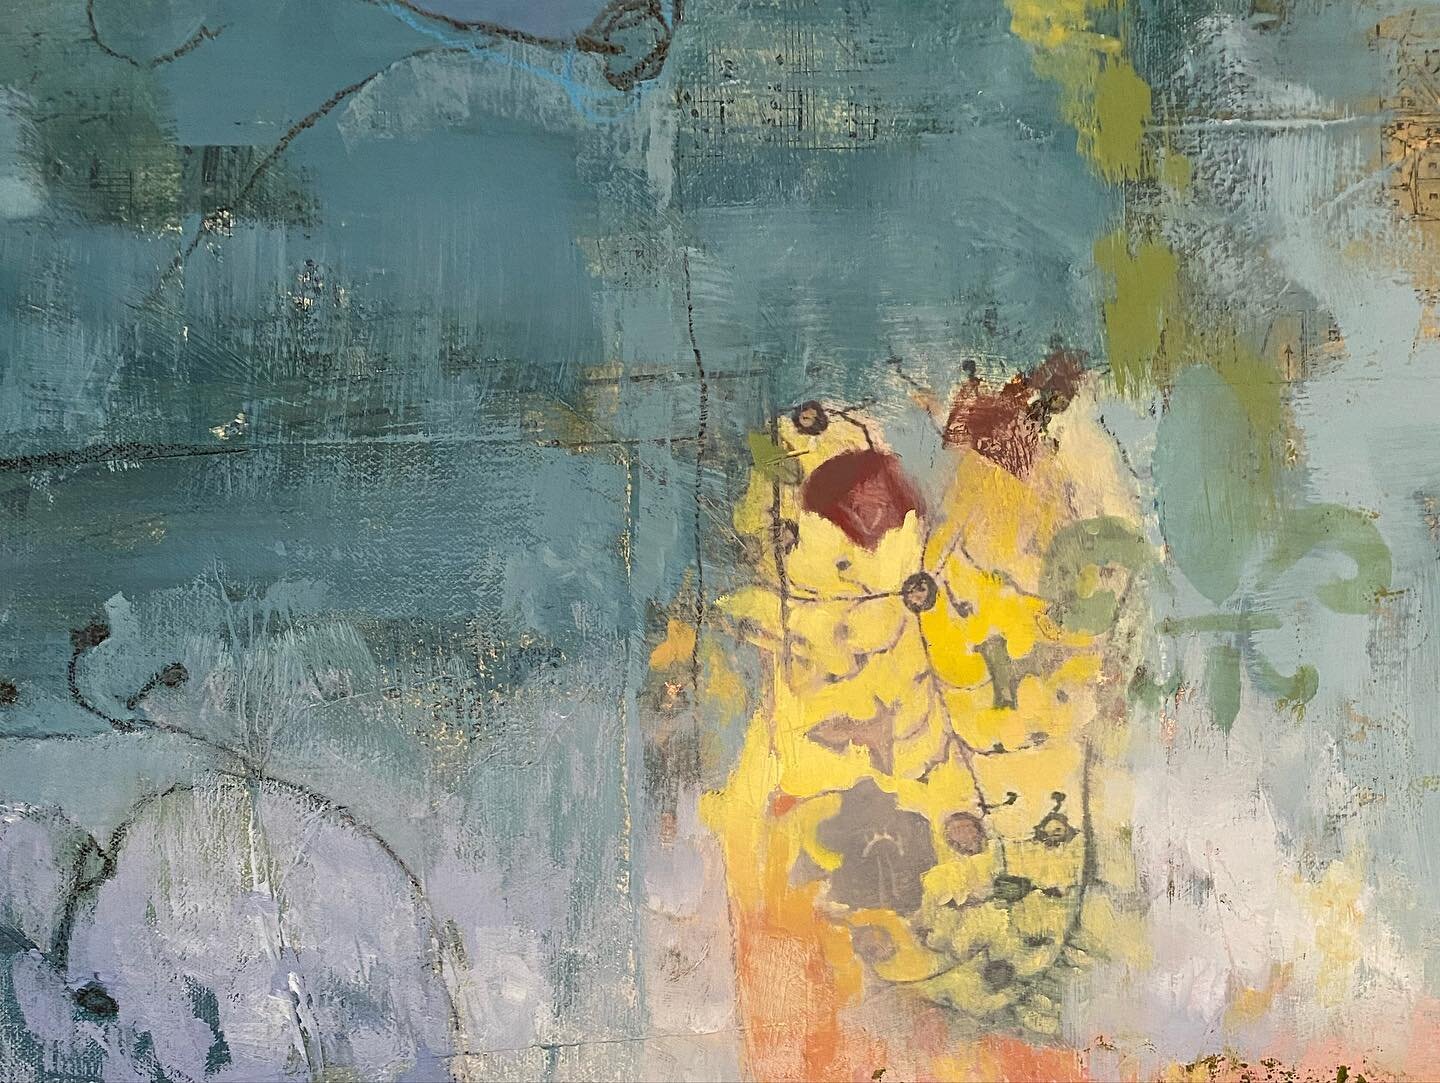 A teaser for new abstract collage paintings on exhibit through May 2022&hellip;

Please join the &ldquo;Friends of Incarnation&rdquo; multi-artist Opening Reception on May 6 from 4-7PM

Arts Incarnate, 75 N Mason St, Harrisonburg, VA 22802, USA

#fin